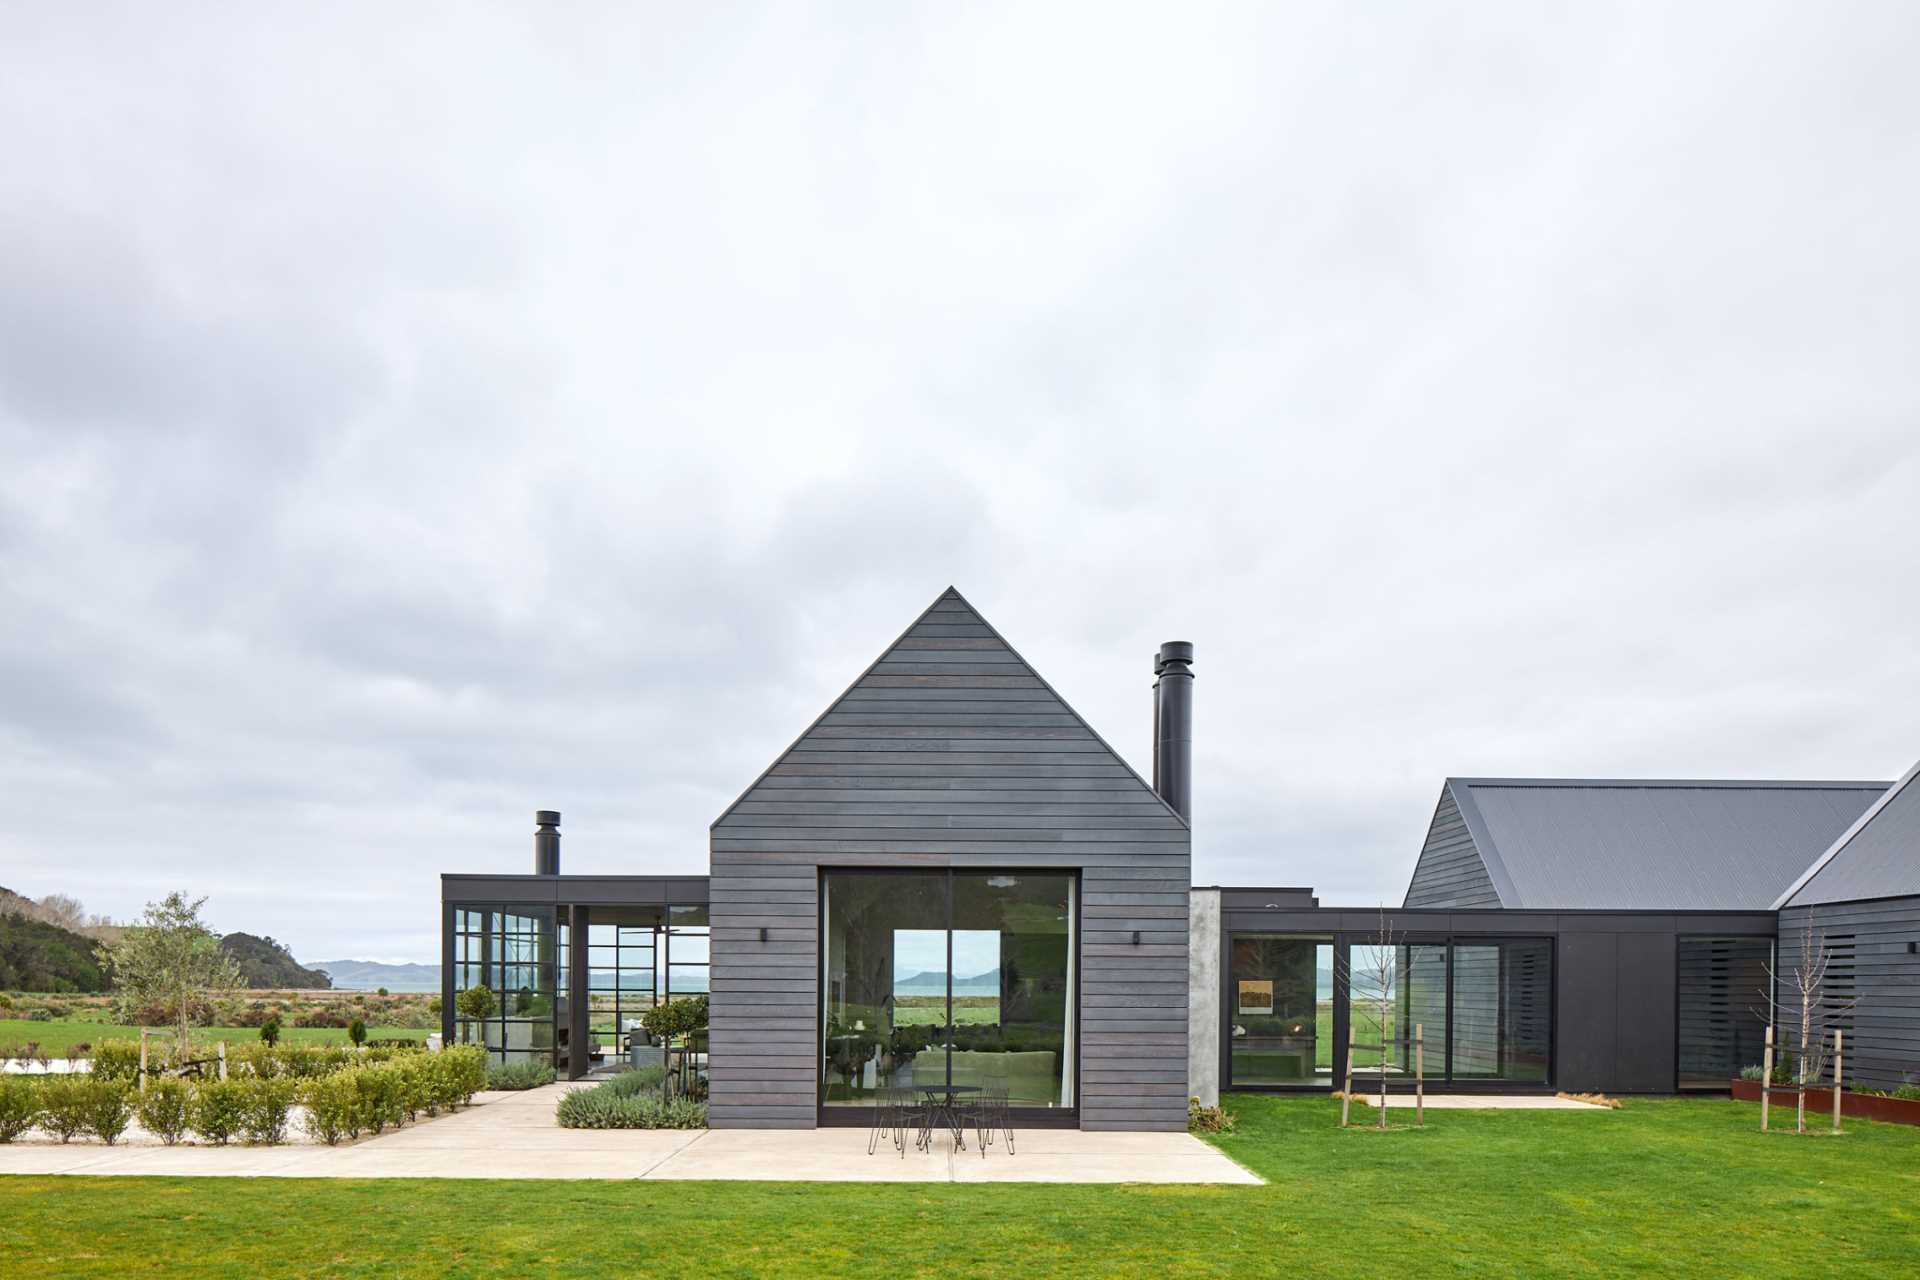 A contemporary farmhouse with grey-stained weathered wood siding and a standing seam grey metal roof.